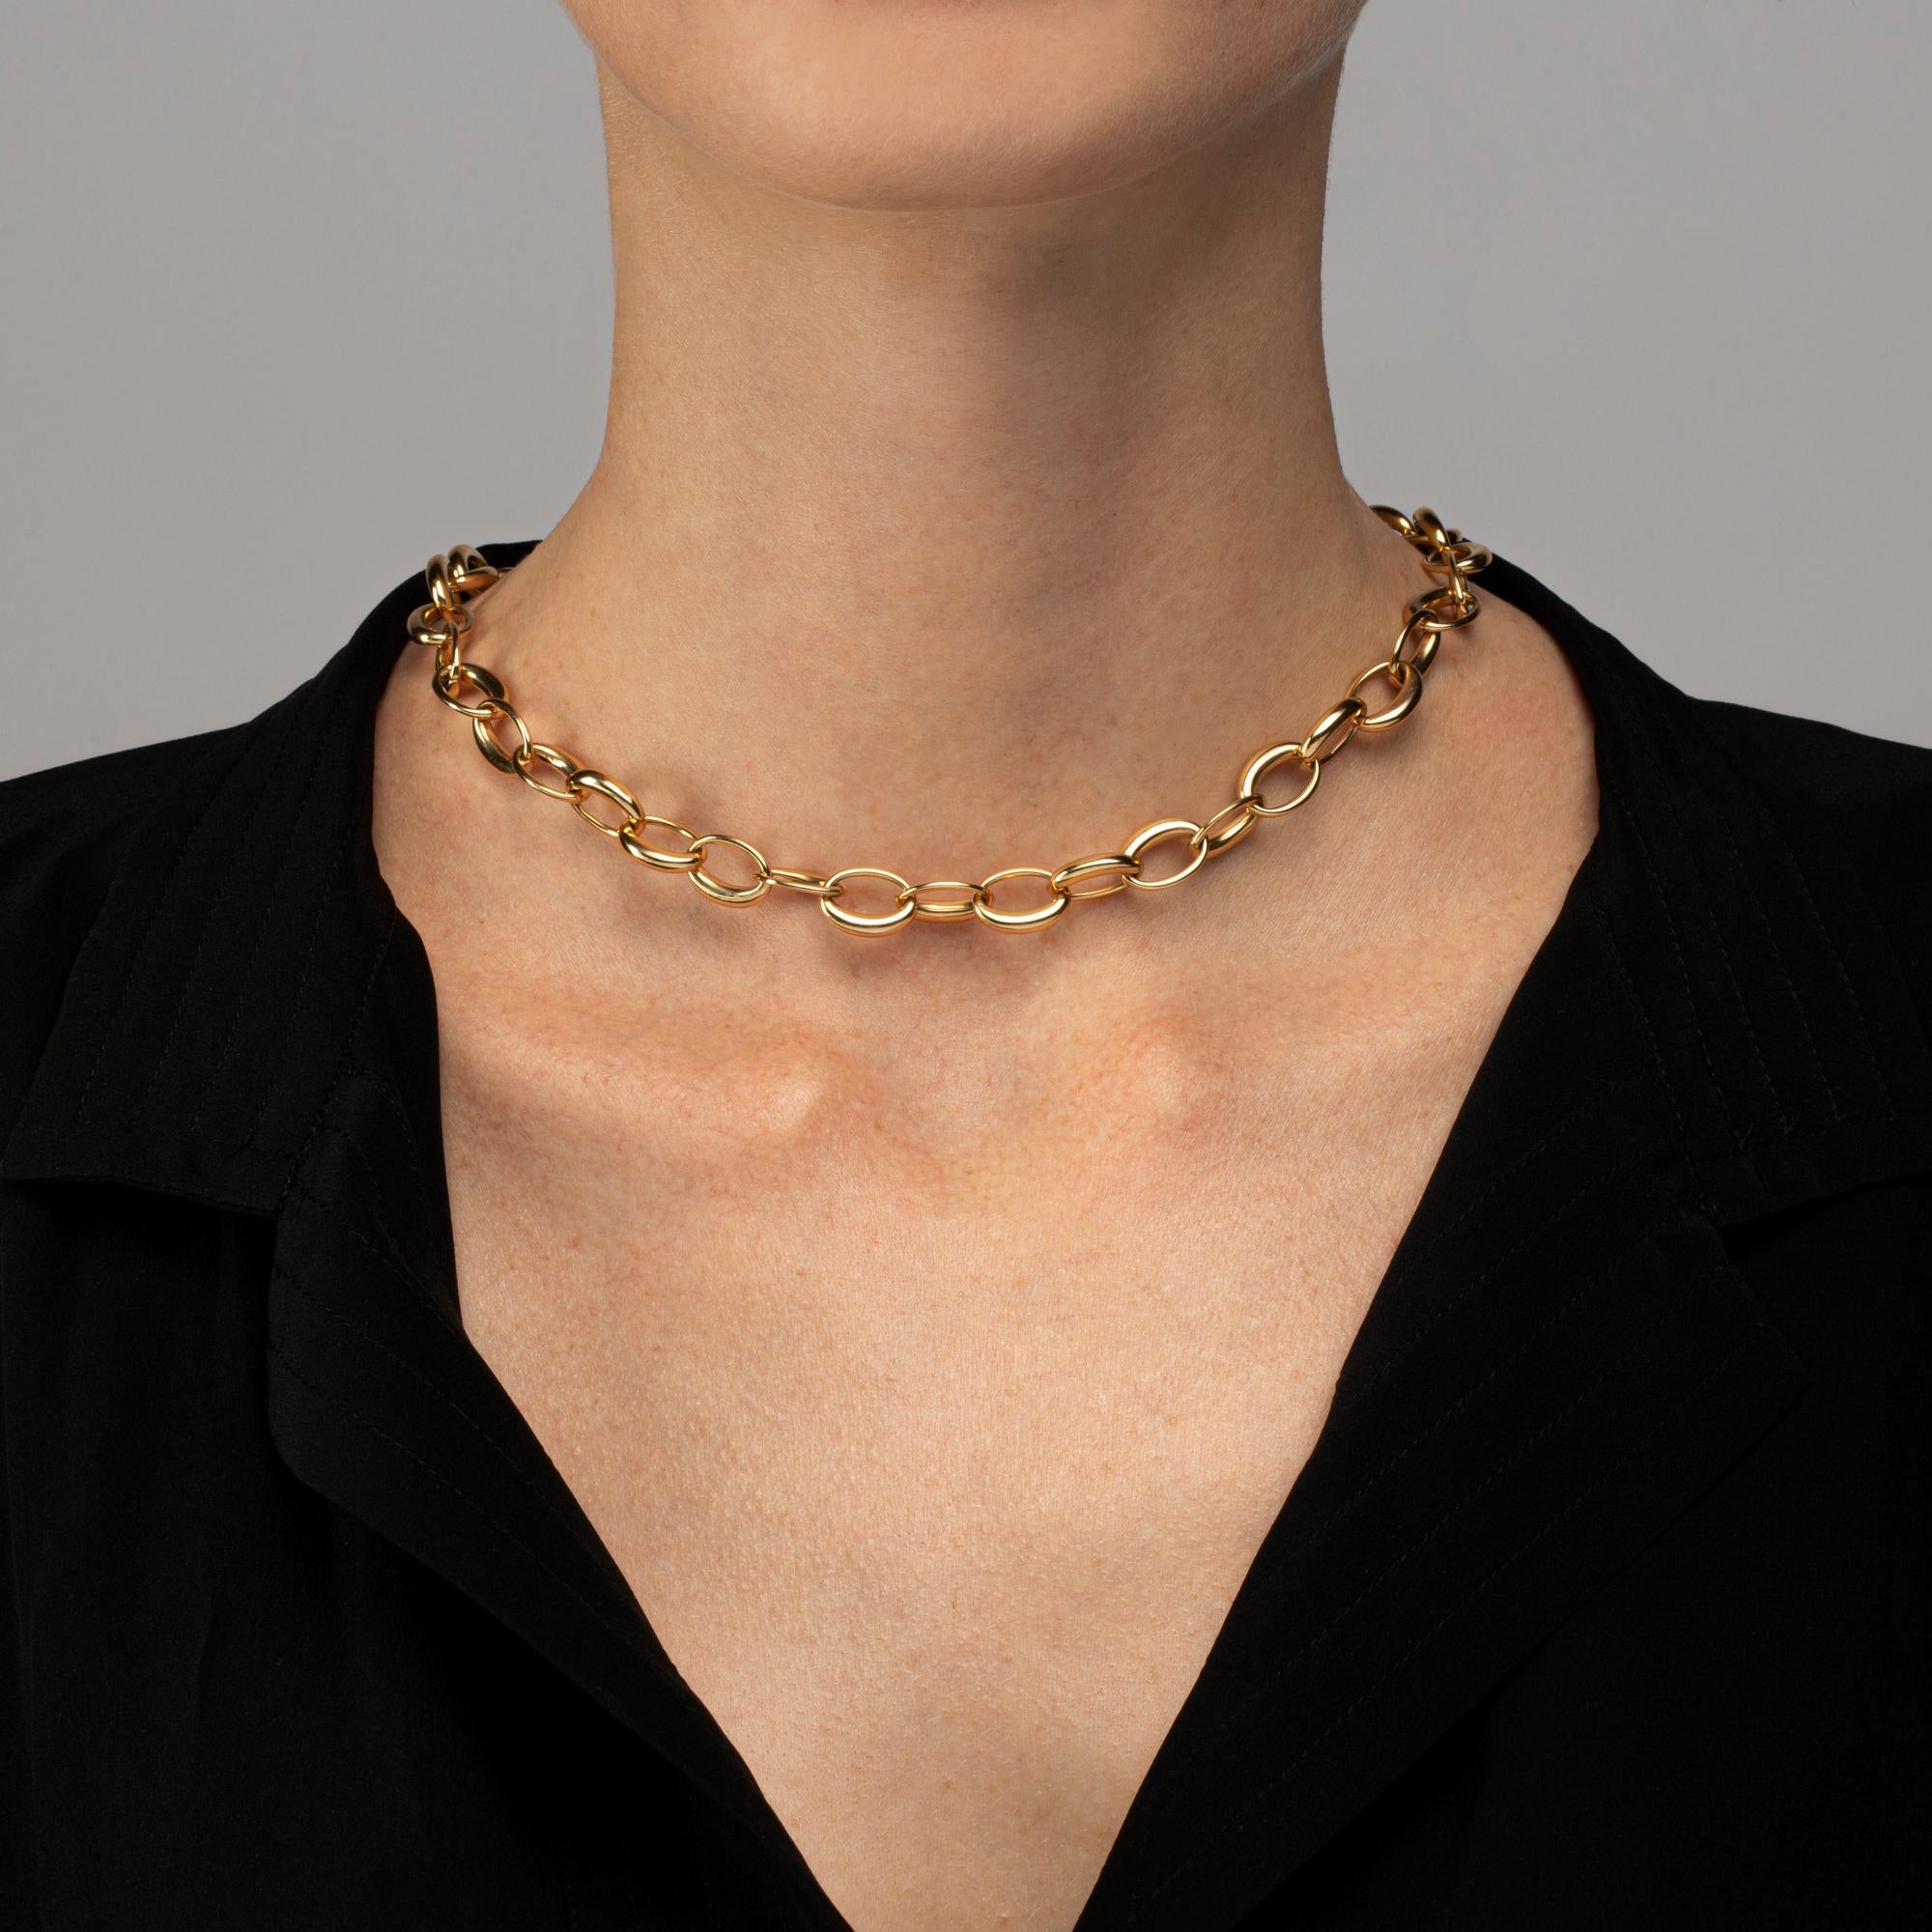 Alex Jona Design Collection, Hand crafted in Italy, 18 karat yellow gold, 17.7 inch-45cm., long link chain necklace.

Alex Jona jewels stand out, not only for their special design and for the excellent quality of the gemstones, but also for the